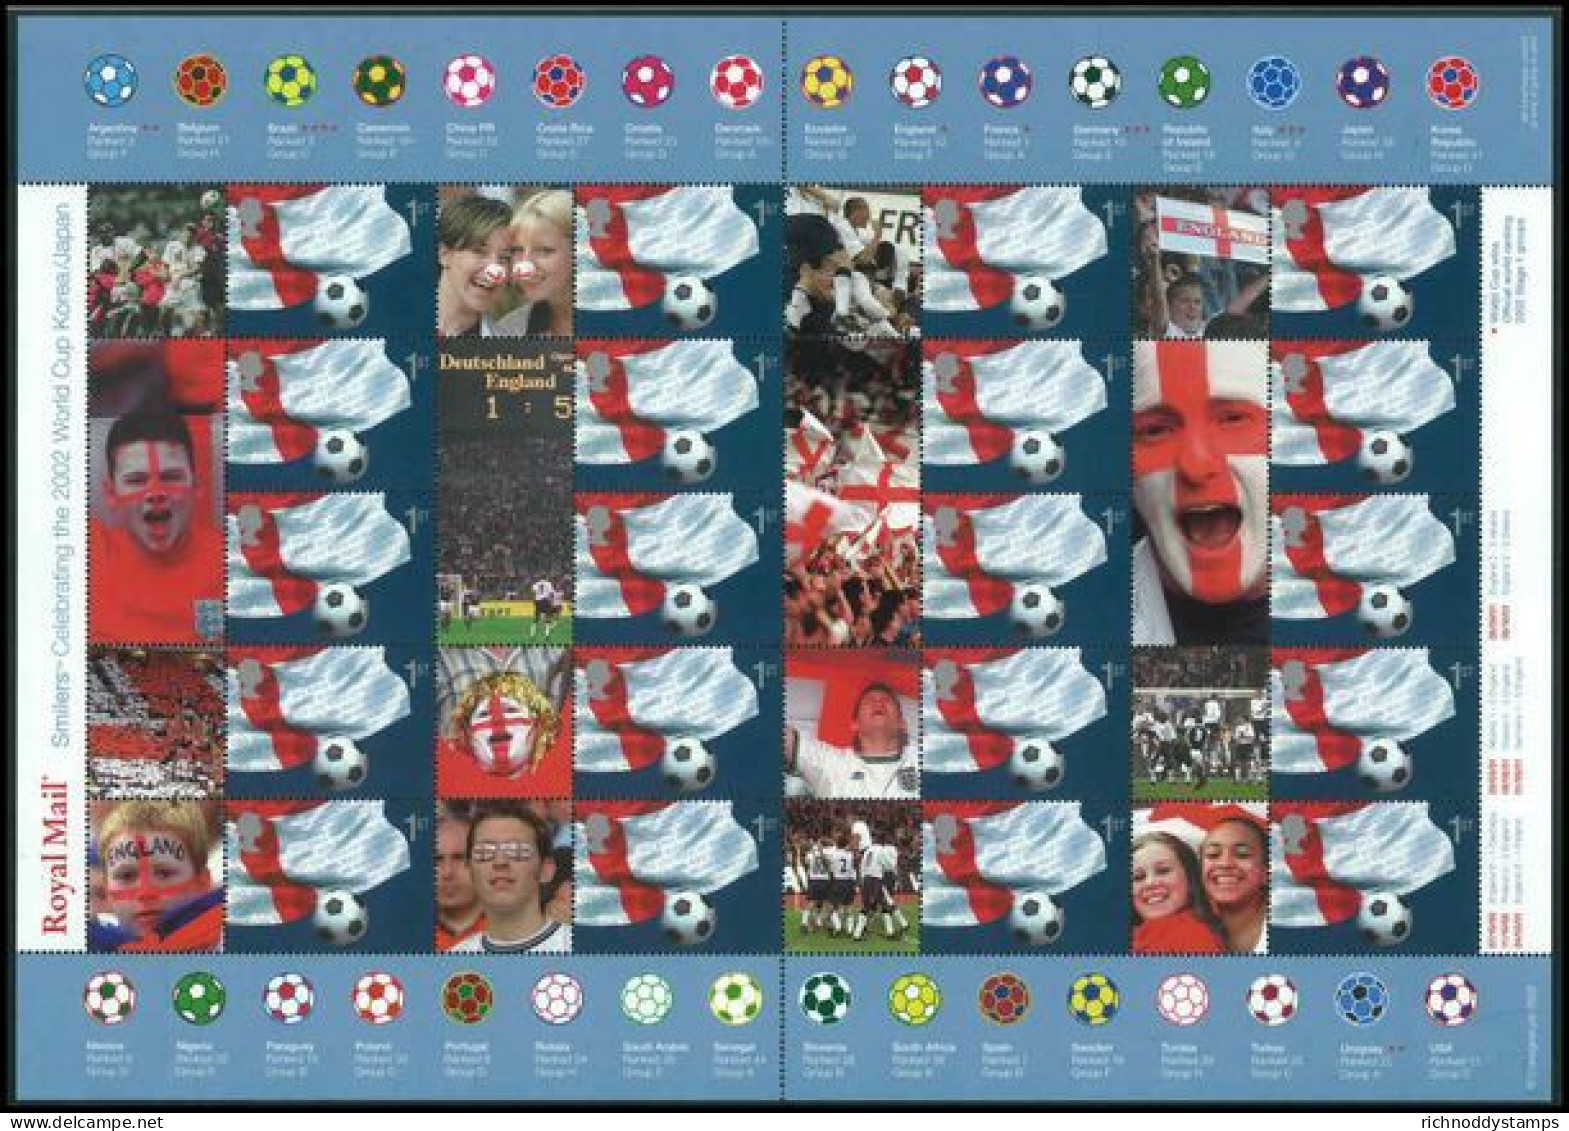 2002 Football World Cup Smilers Sheet Unmounted Mint. Imprinted Consignia Plc 2002unmounted Mint - Personalisierte Briefmarken